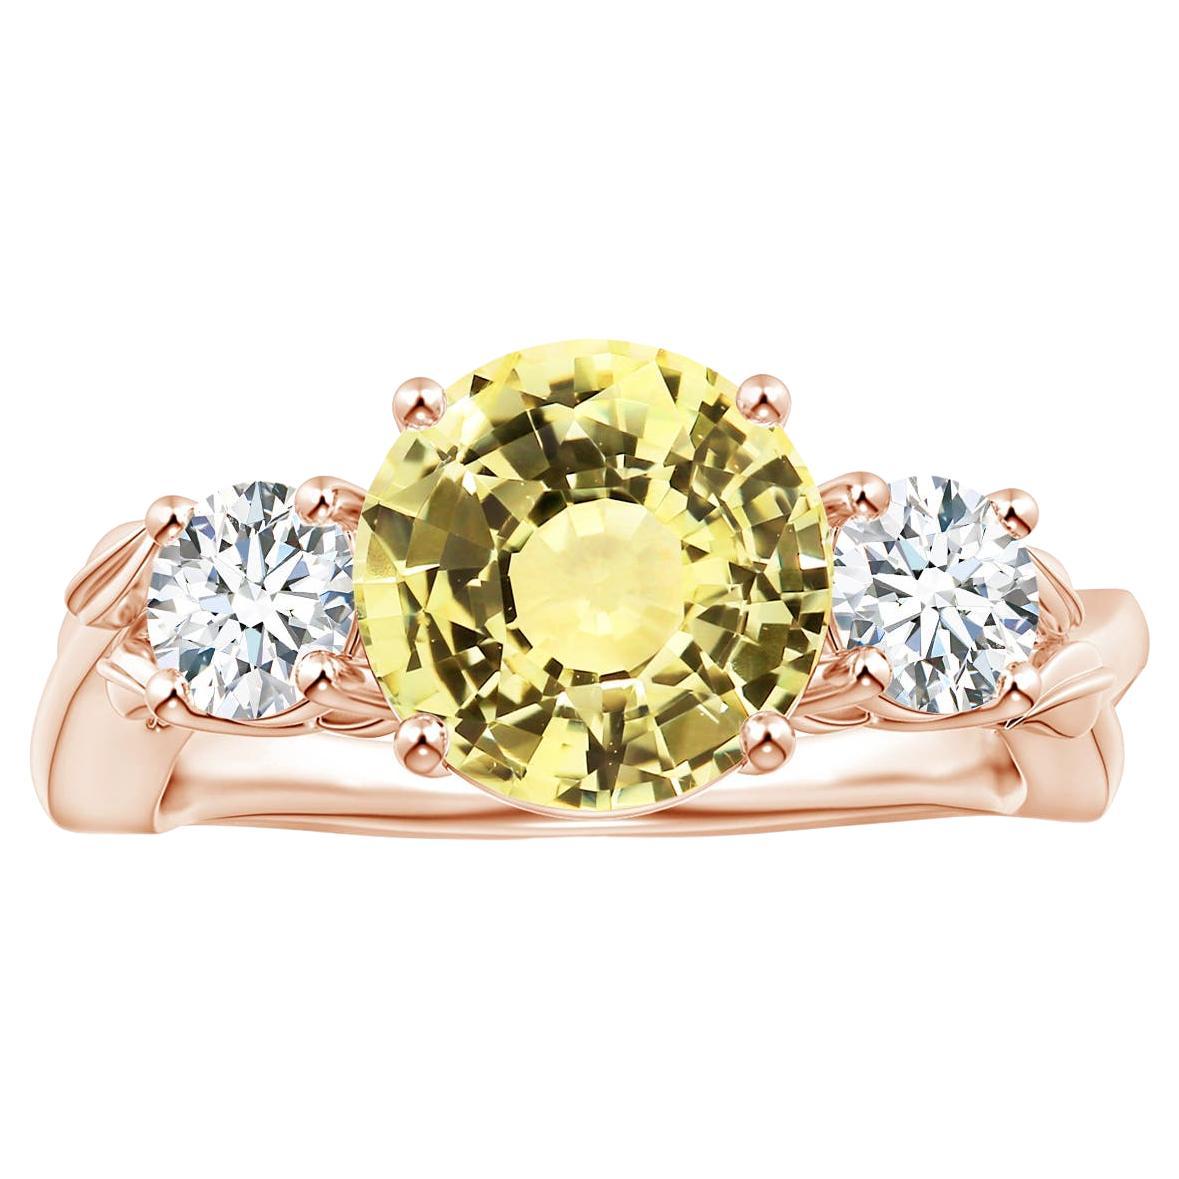 For Sale:  Angara Gia Certified Yellow Sapphire Three Stone Ring in Rose Gold with Diamonds